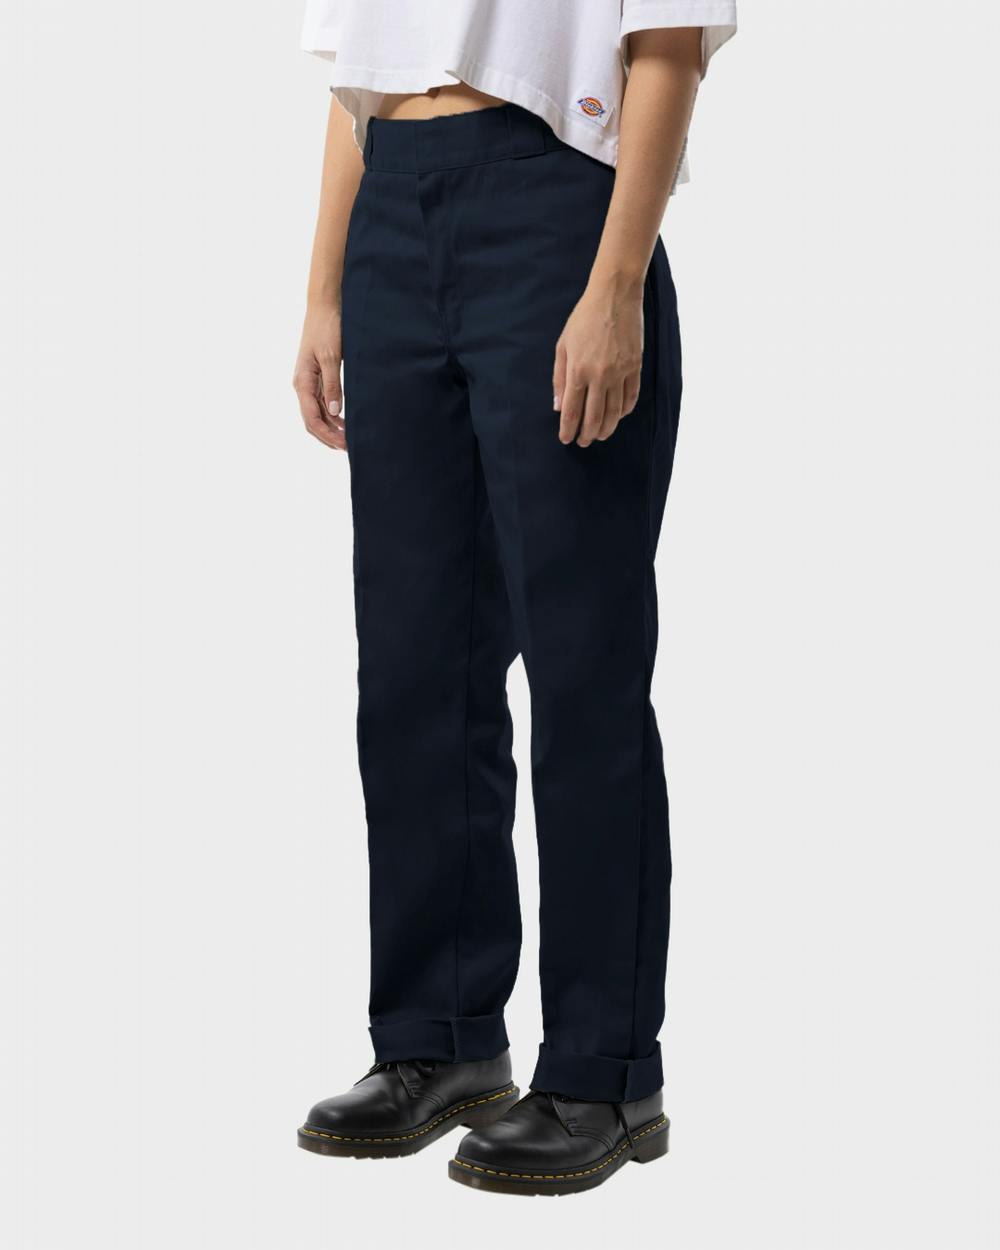 Dickies Work Pants Womens Size 14 Reg Navy Blue NEW with Tags